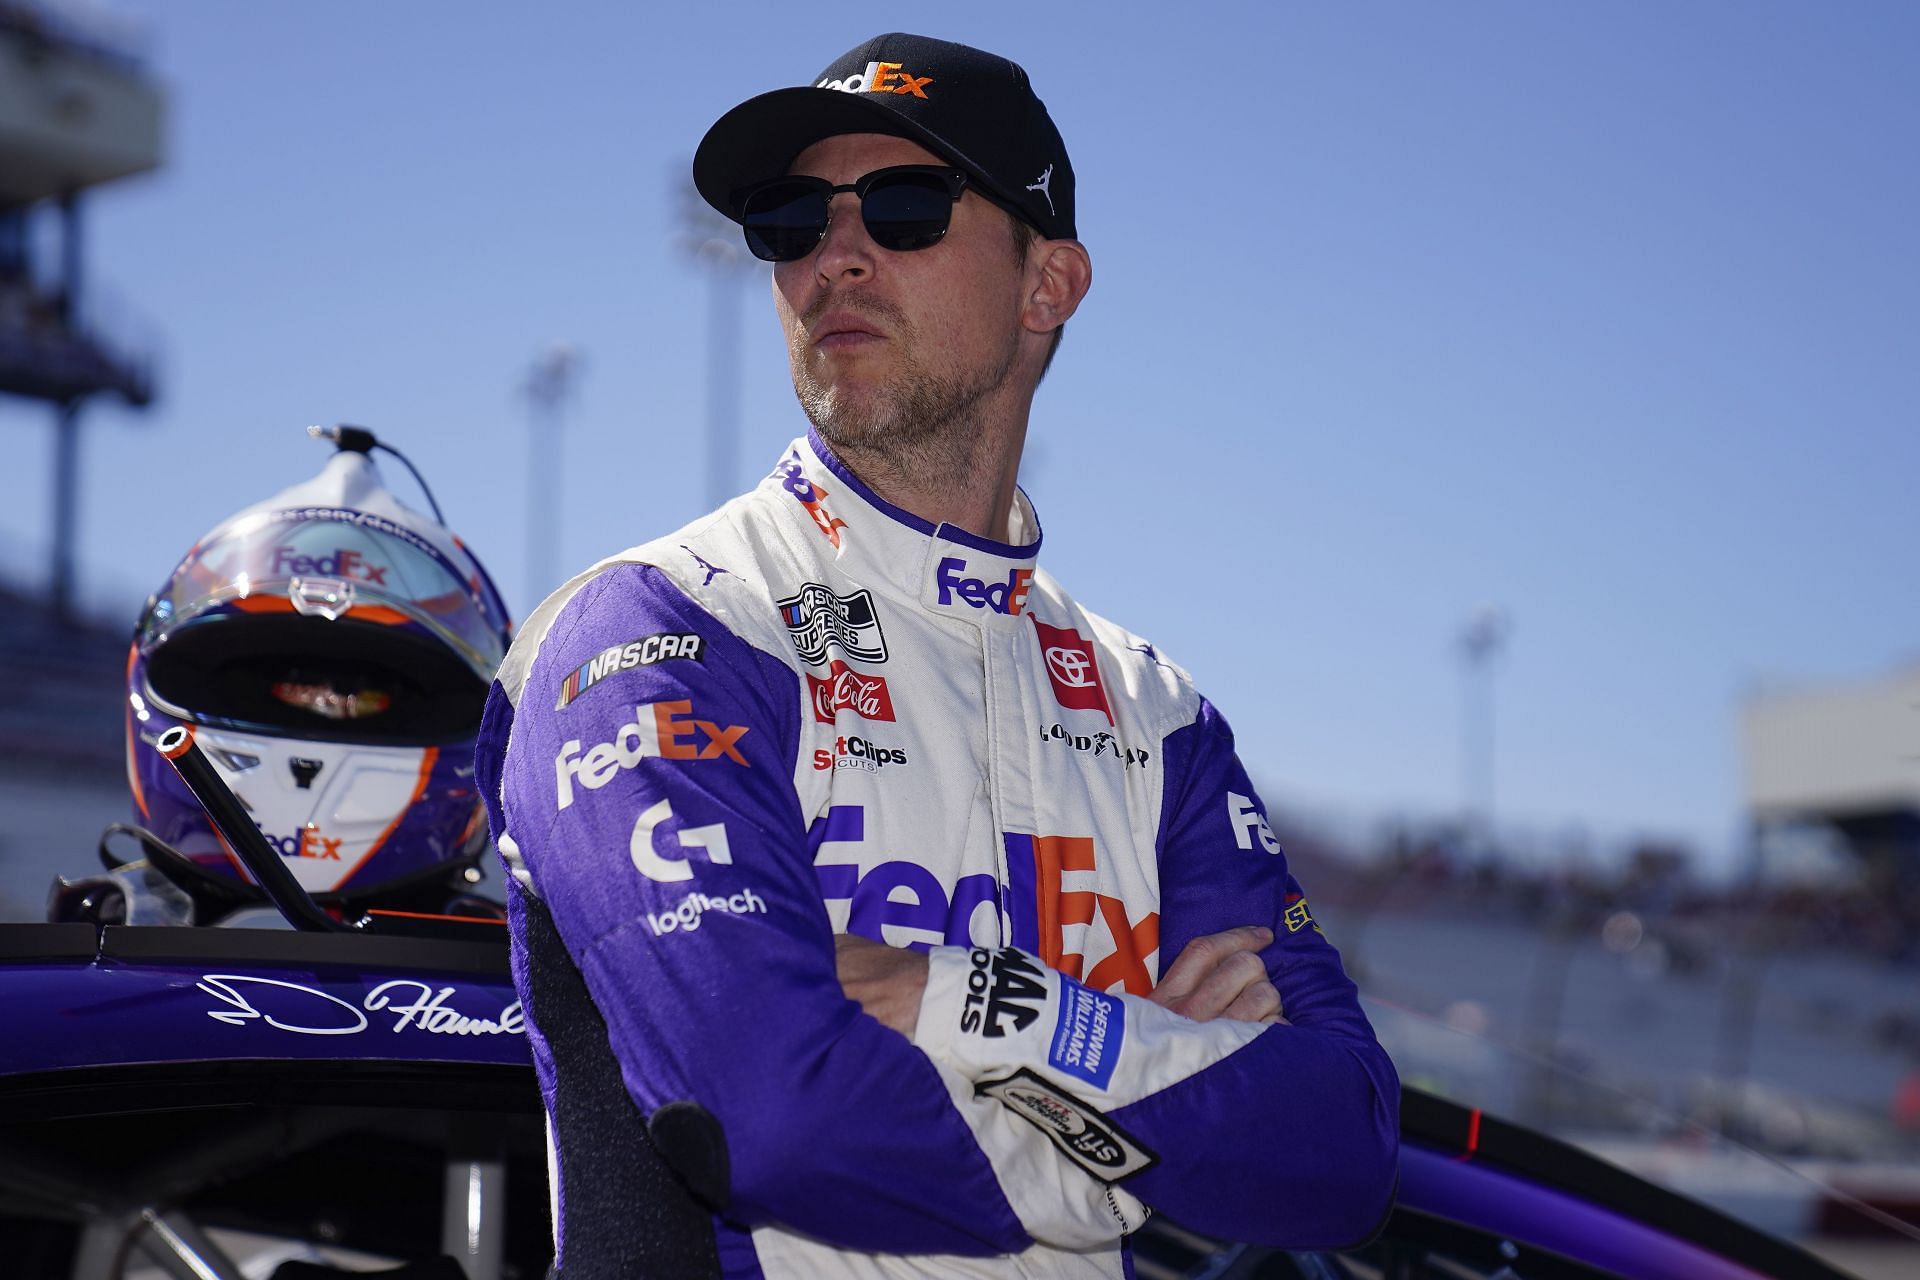 Denny Hamlin looks on during qualifying for the NASCAR Cup Series Toyota Owners 400 at Richmond Raceway.